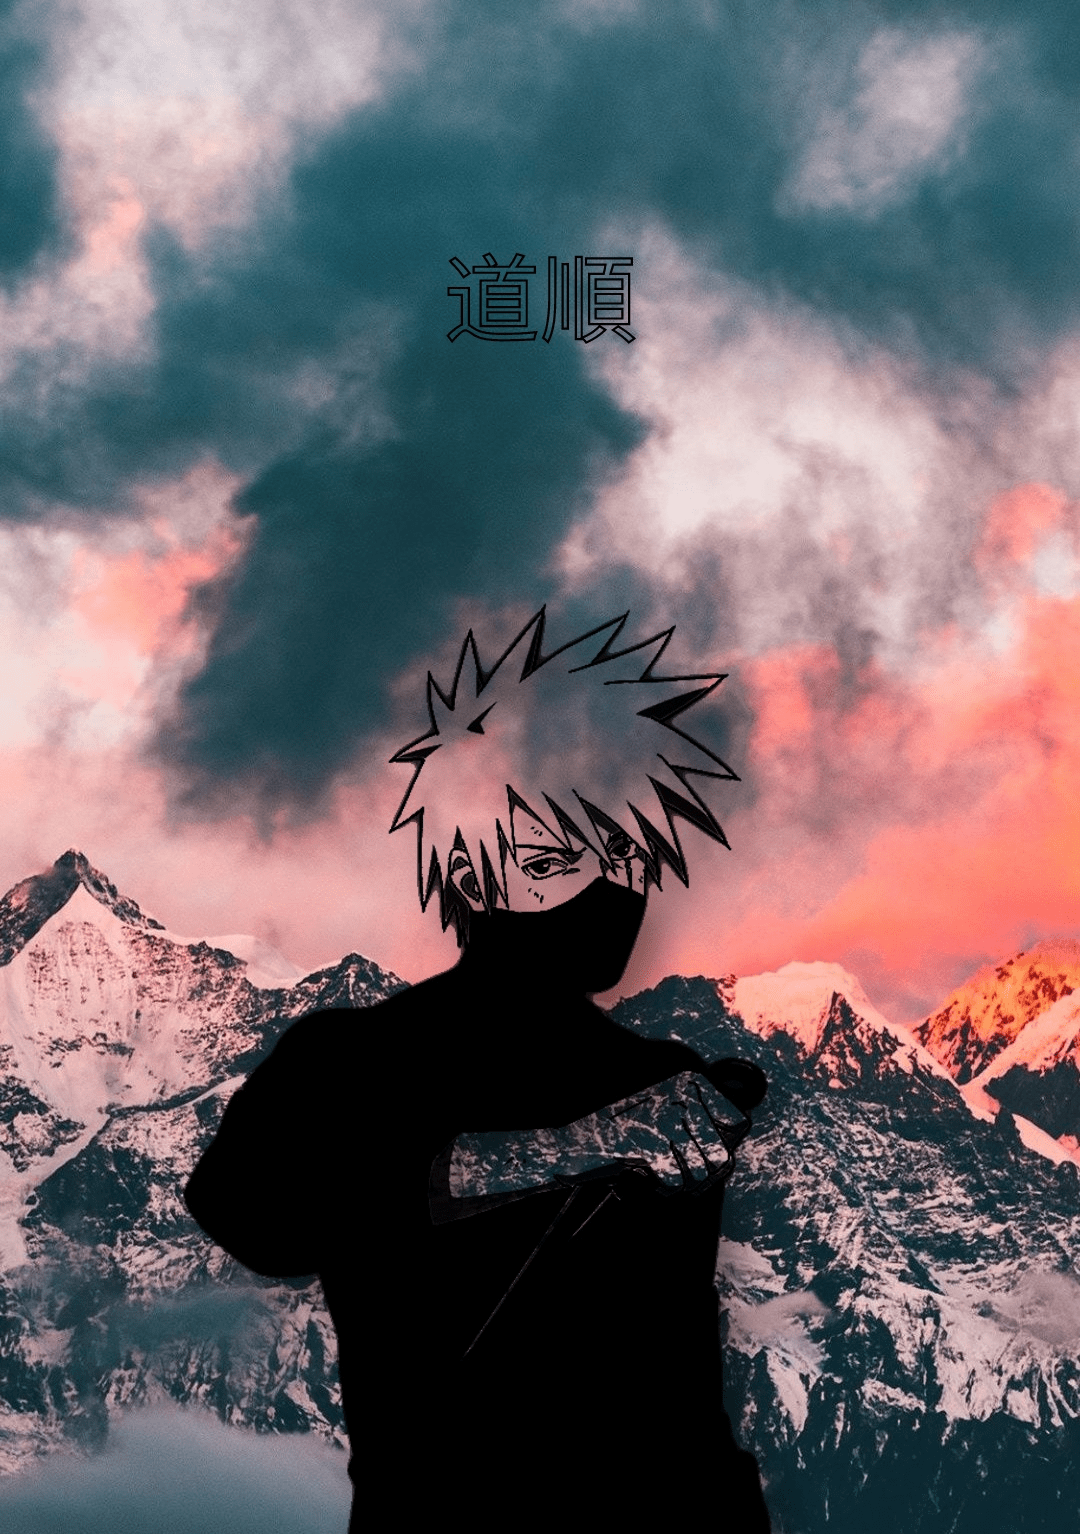 A Kakashi Aesthetic Wallpaper and Gif I made! Suggestions are open